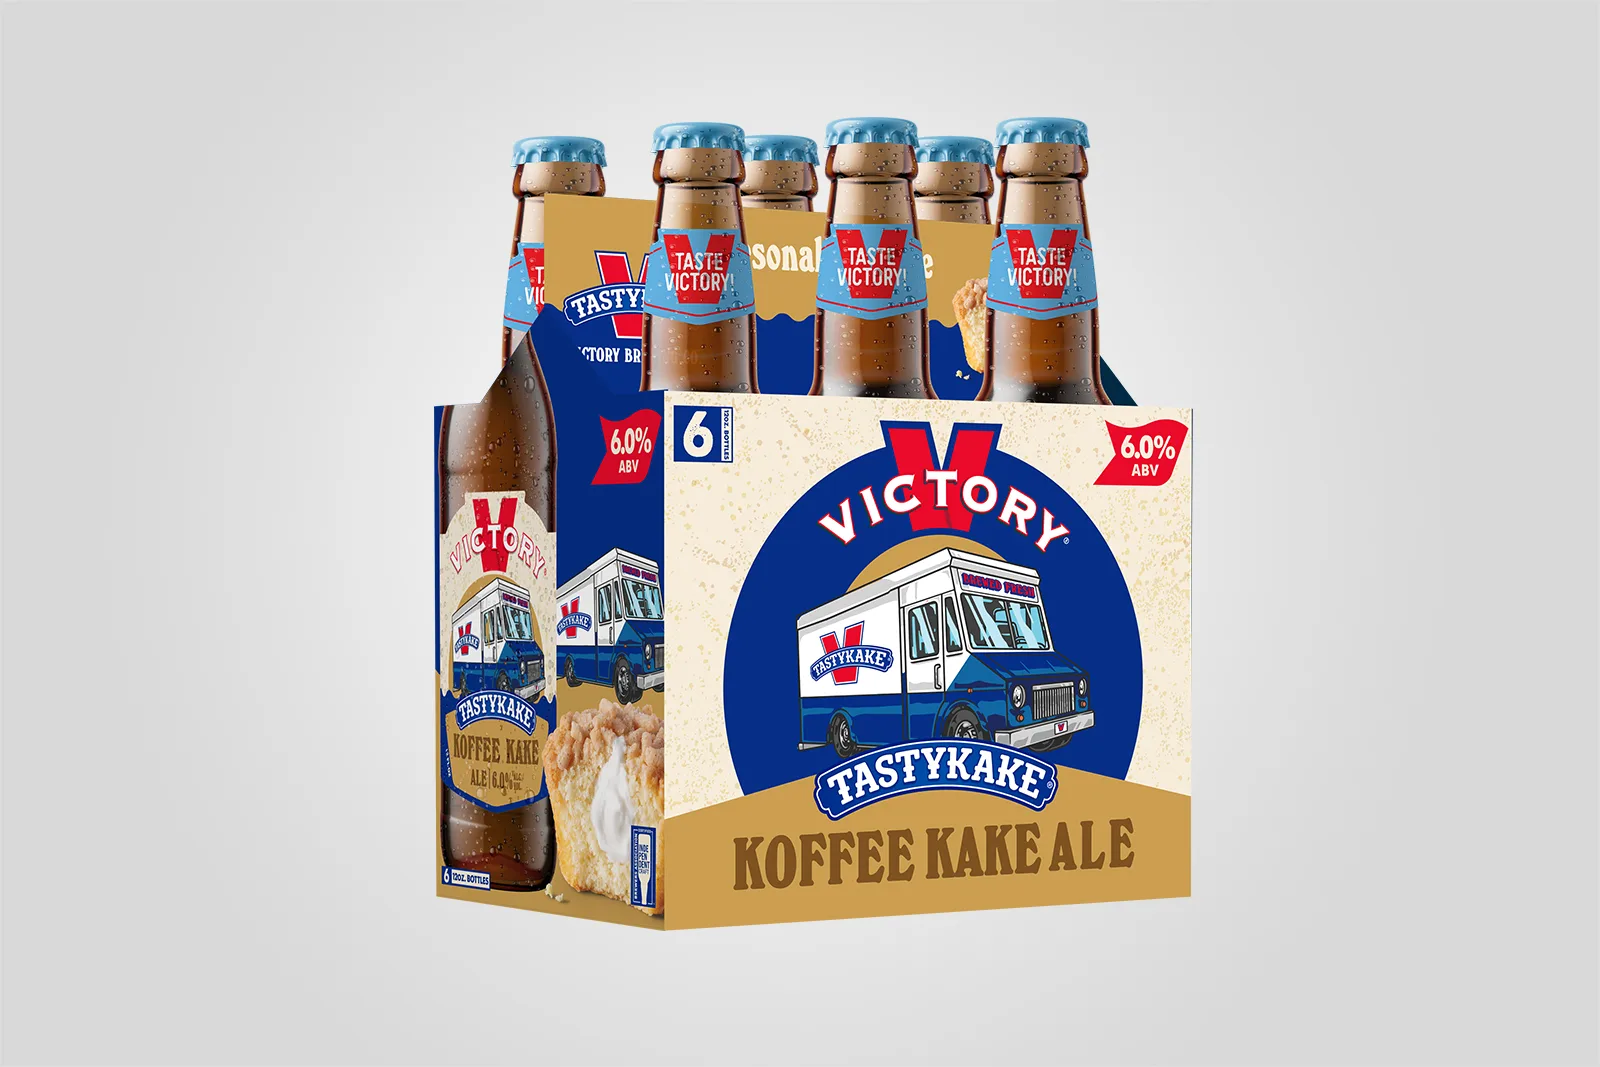 Koffee Kake Ale from Victory Brewing Company, a collaboration with Tastykake